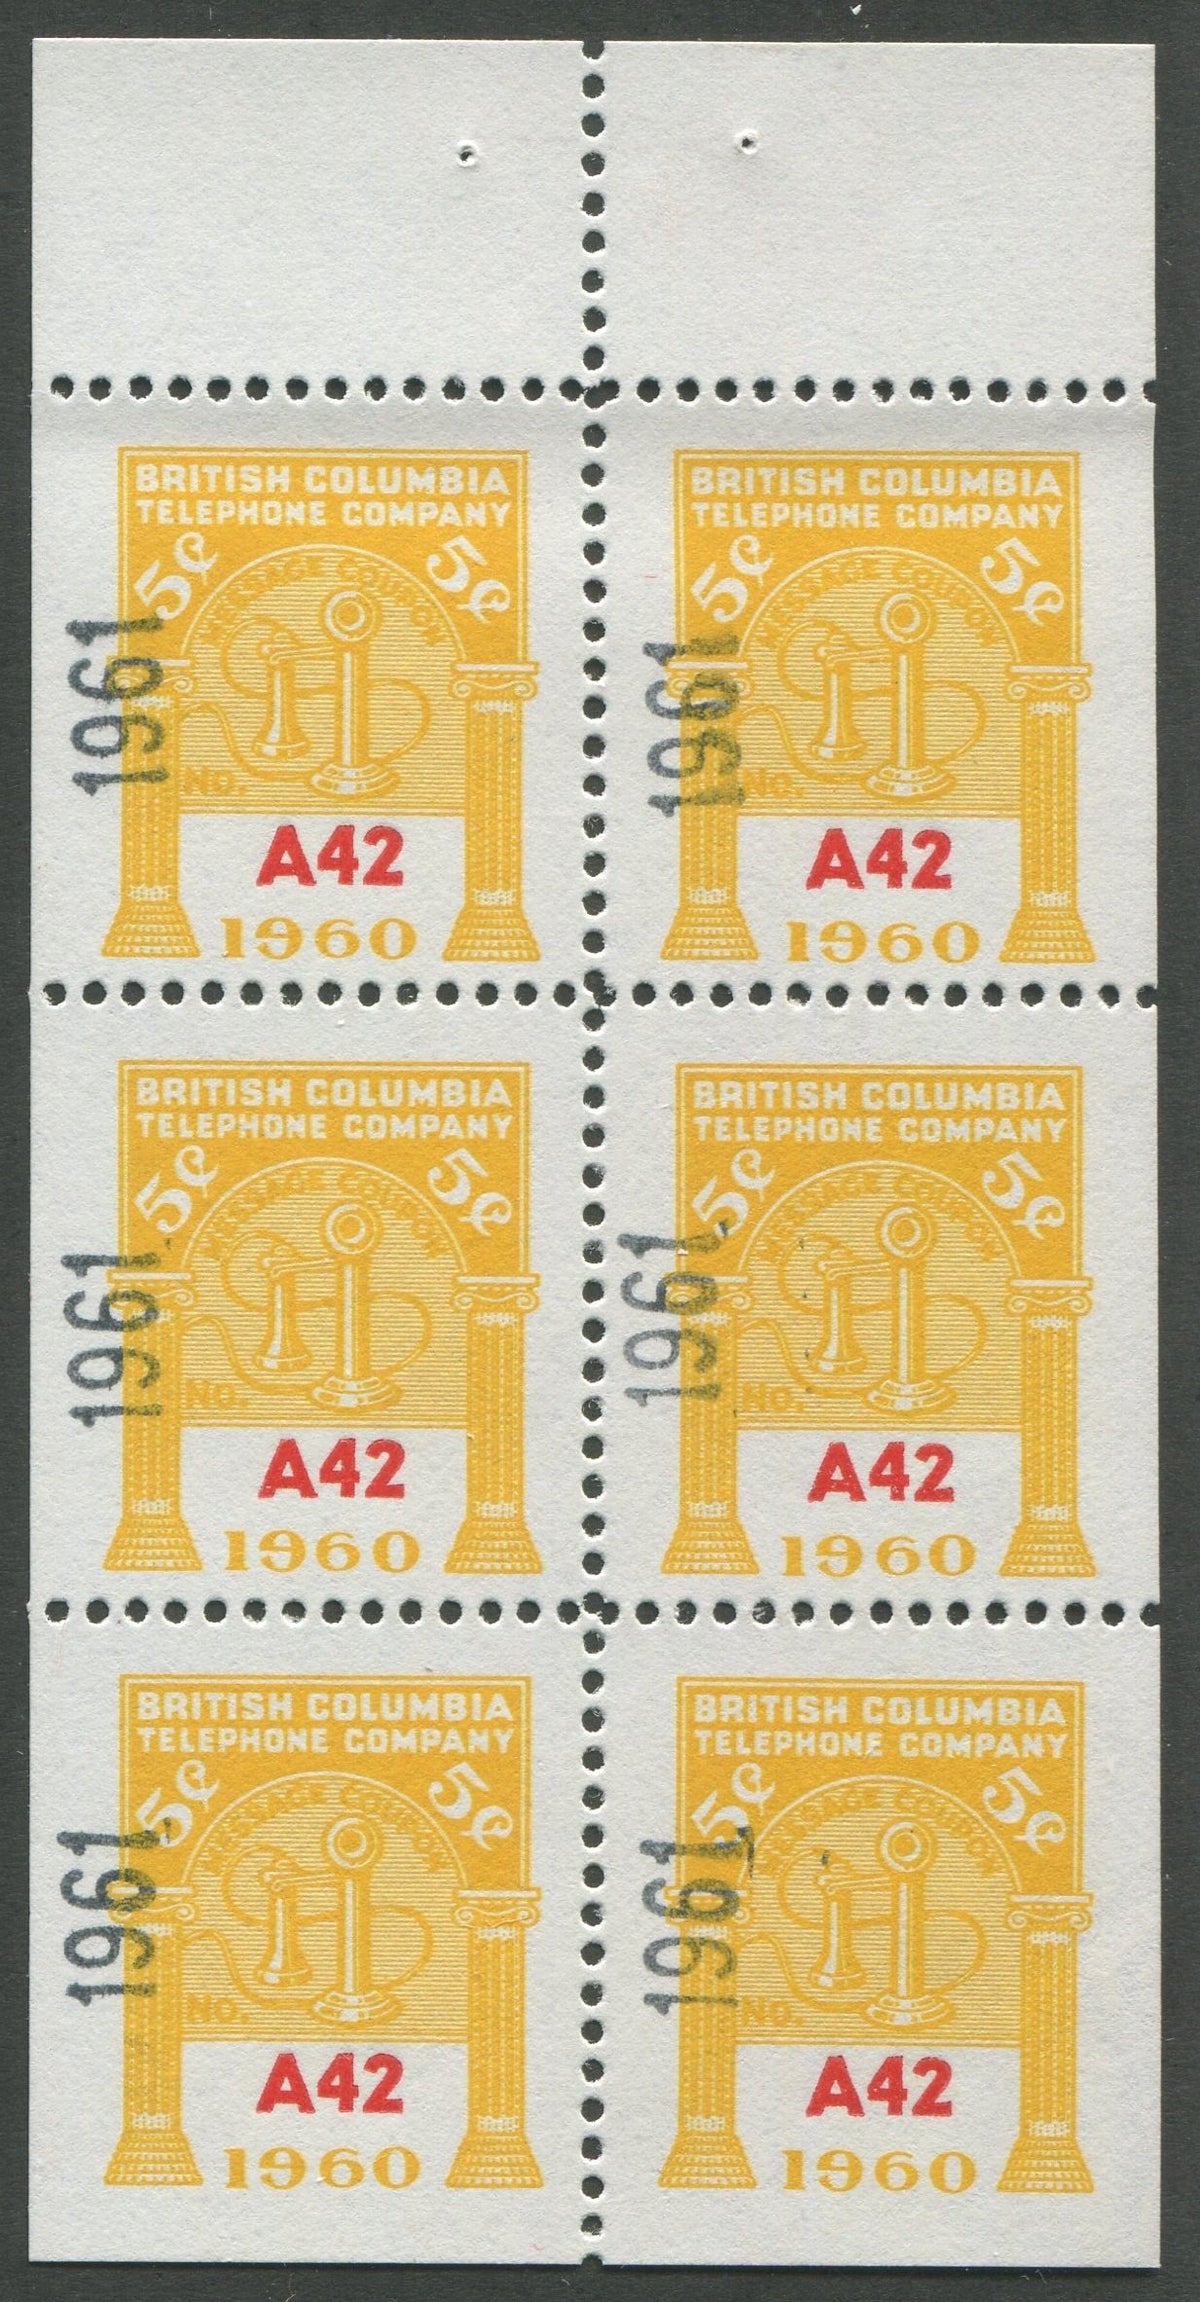 0291BC1708 - BCT193 - Mint Booklet Pane, Watermarked